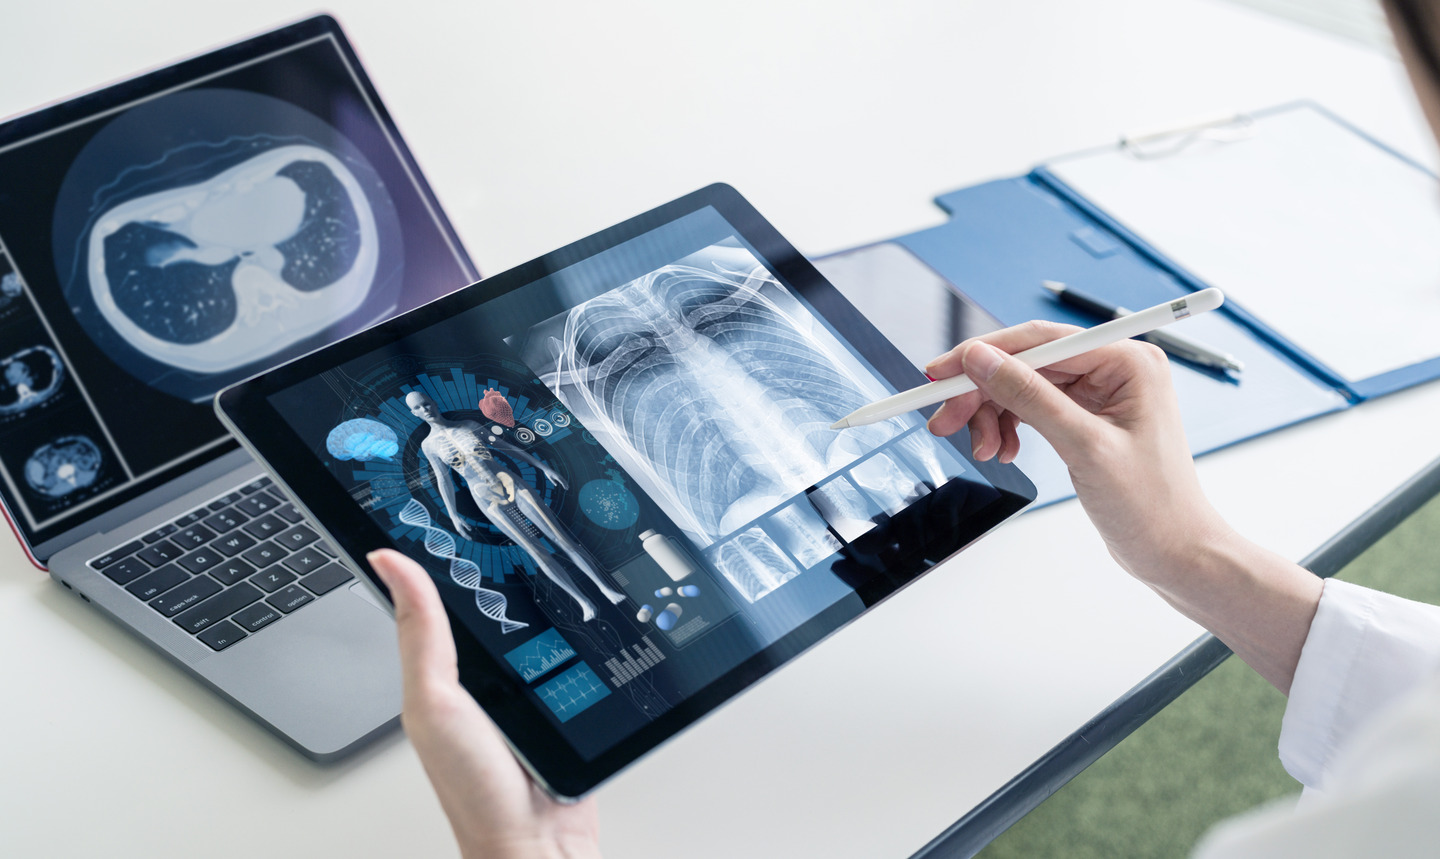 Medical devices and IoT devices are all covered by healthcare cybersecurity.